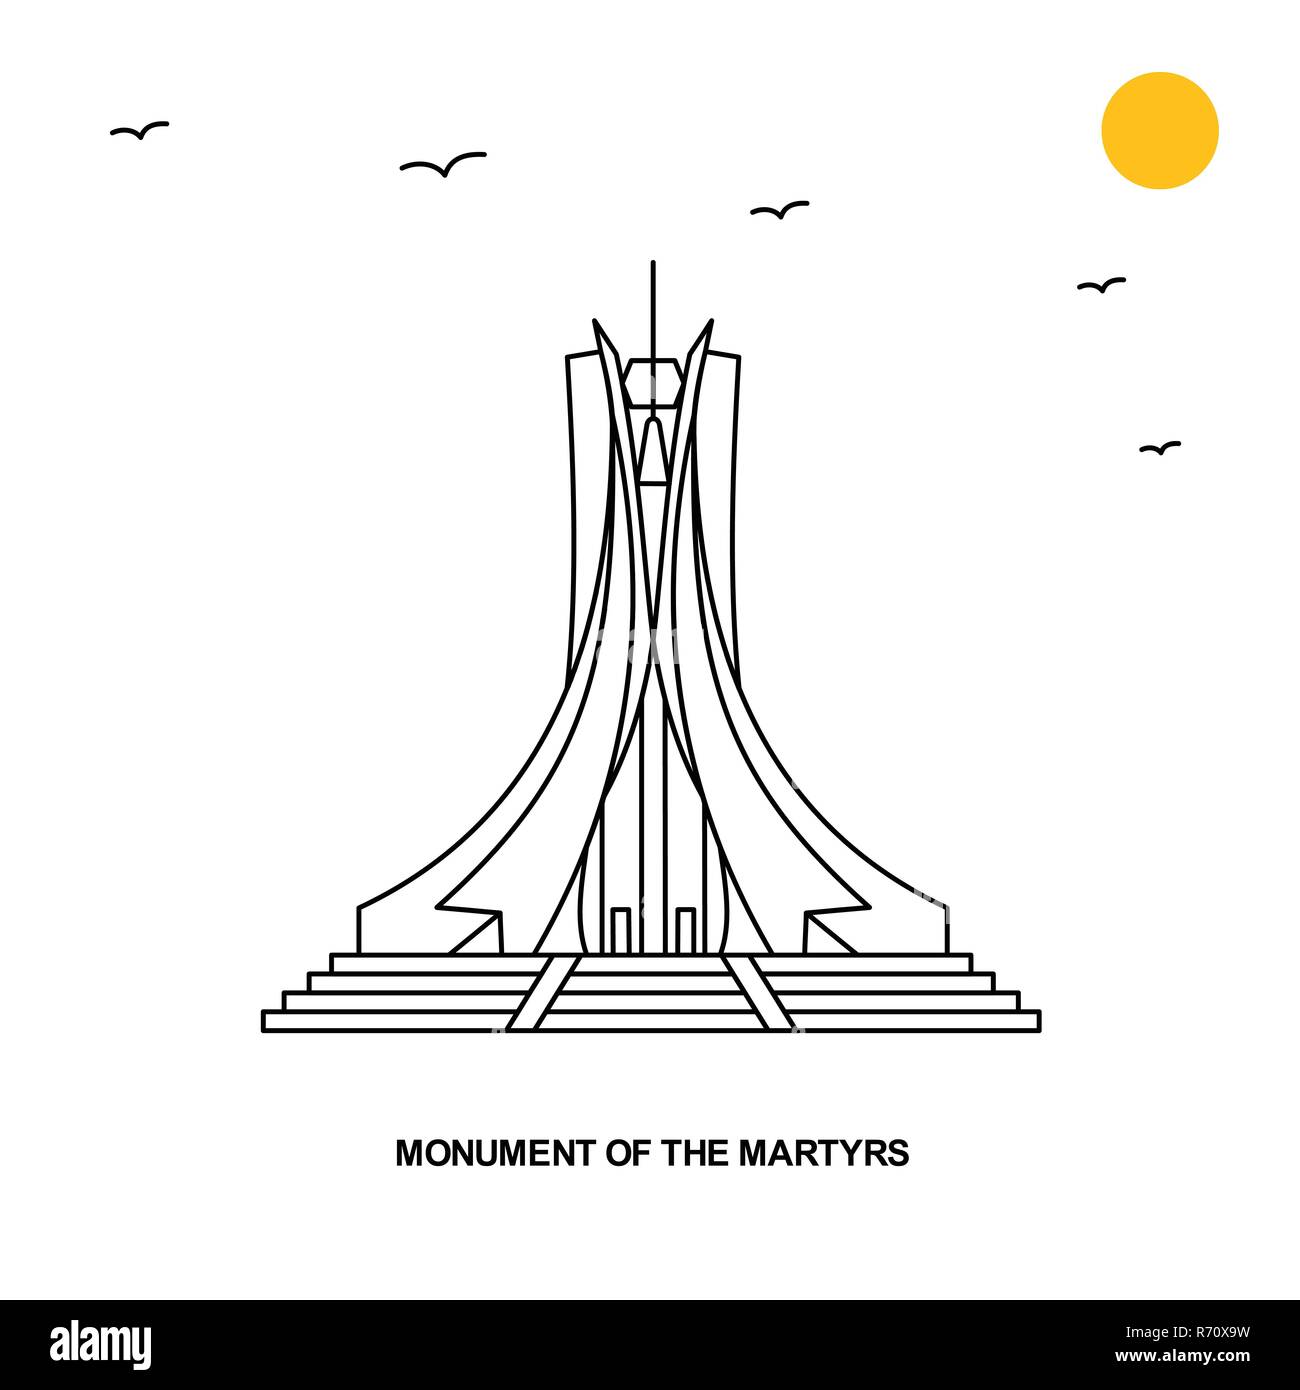 MONUMENT OF THE MARTYRS Monument. World Travel Natural illustration Background in Line Style Stock Vector